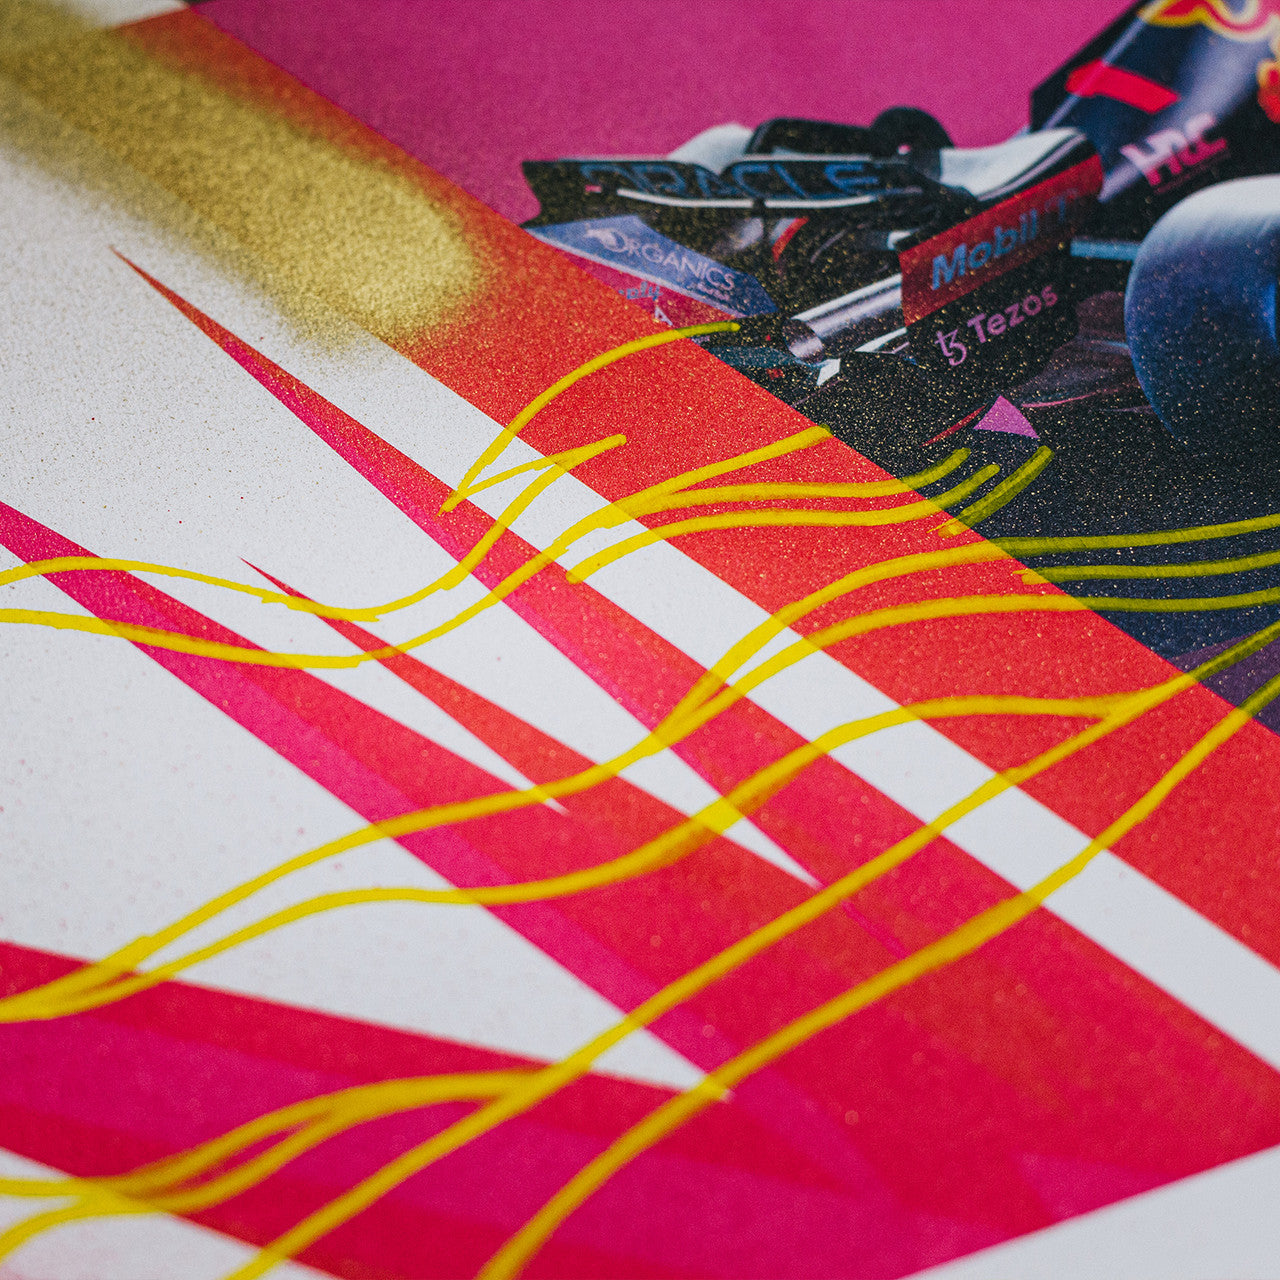 Oracle Red Bull Racing - Max Verstappen - Art to the Max - 2022 | Art Edition | #12/25